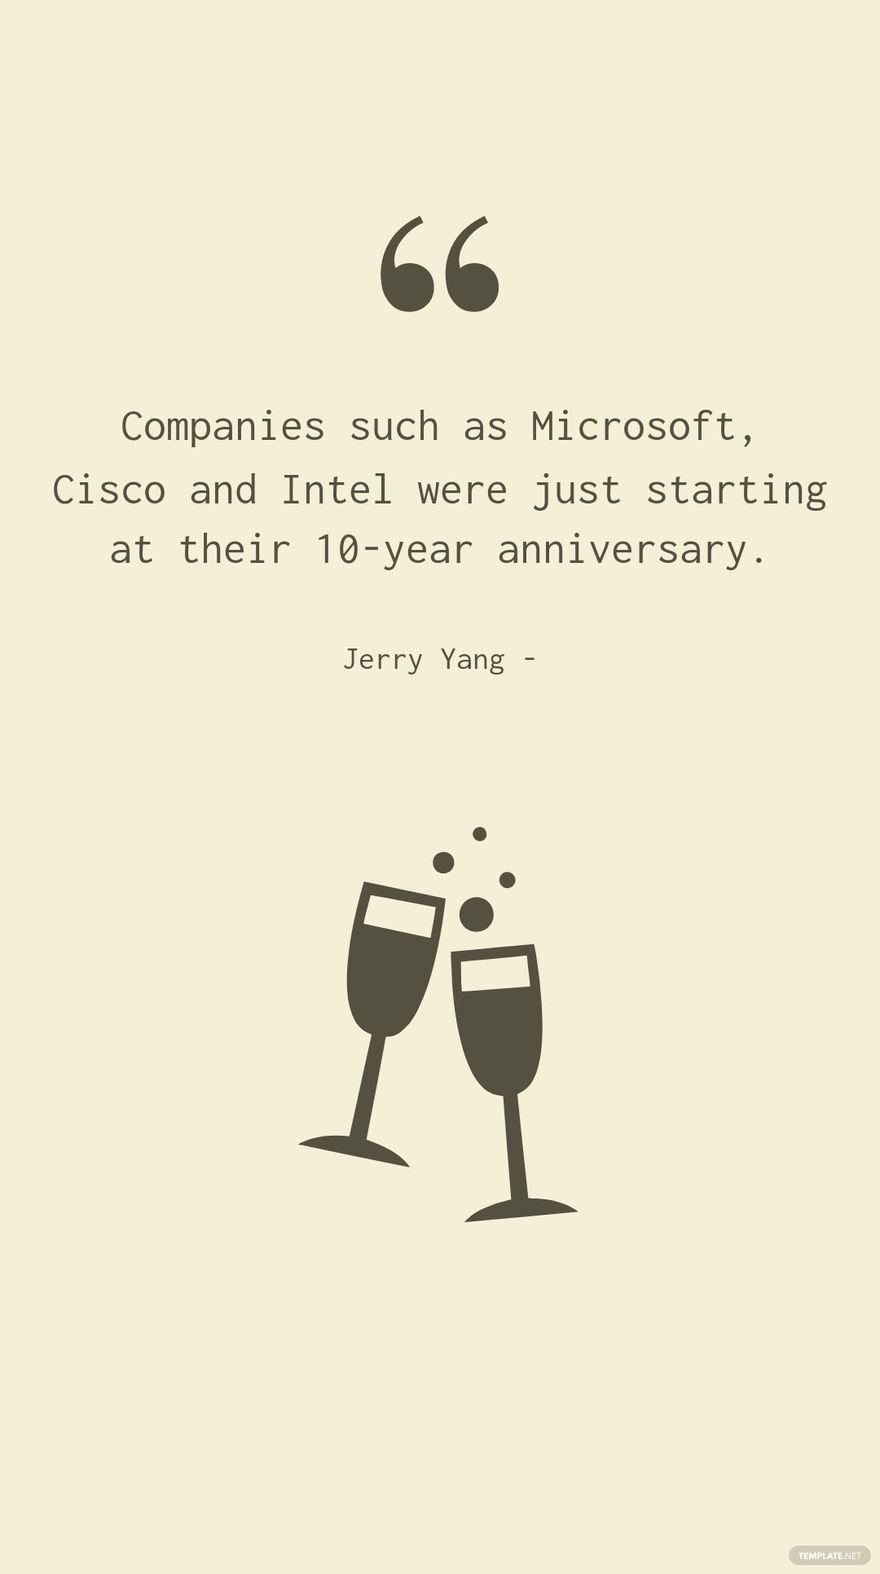 Jerry Yang - Companies such as Microsoft, Cisco and Intel were just starting at their 10-year anniversary.